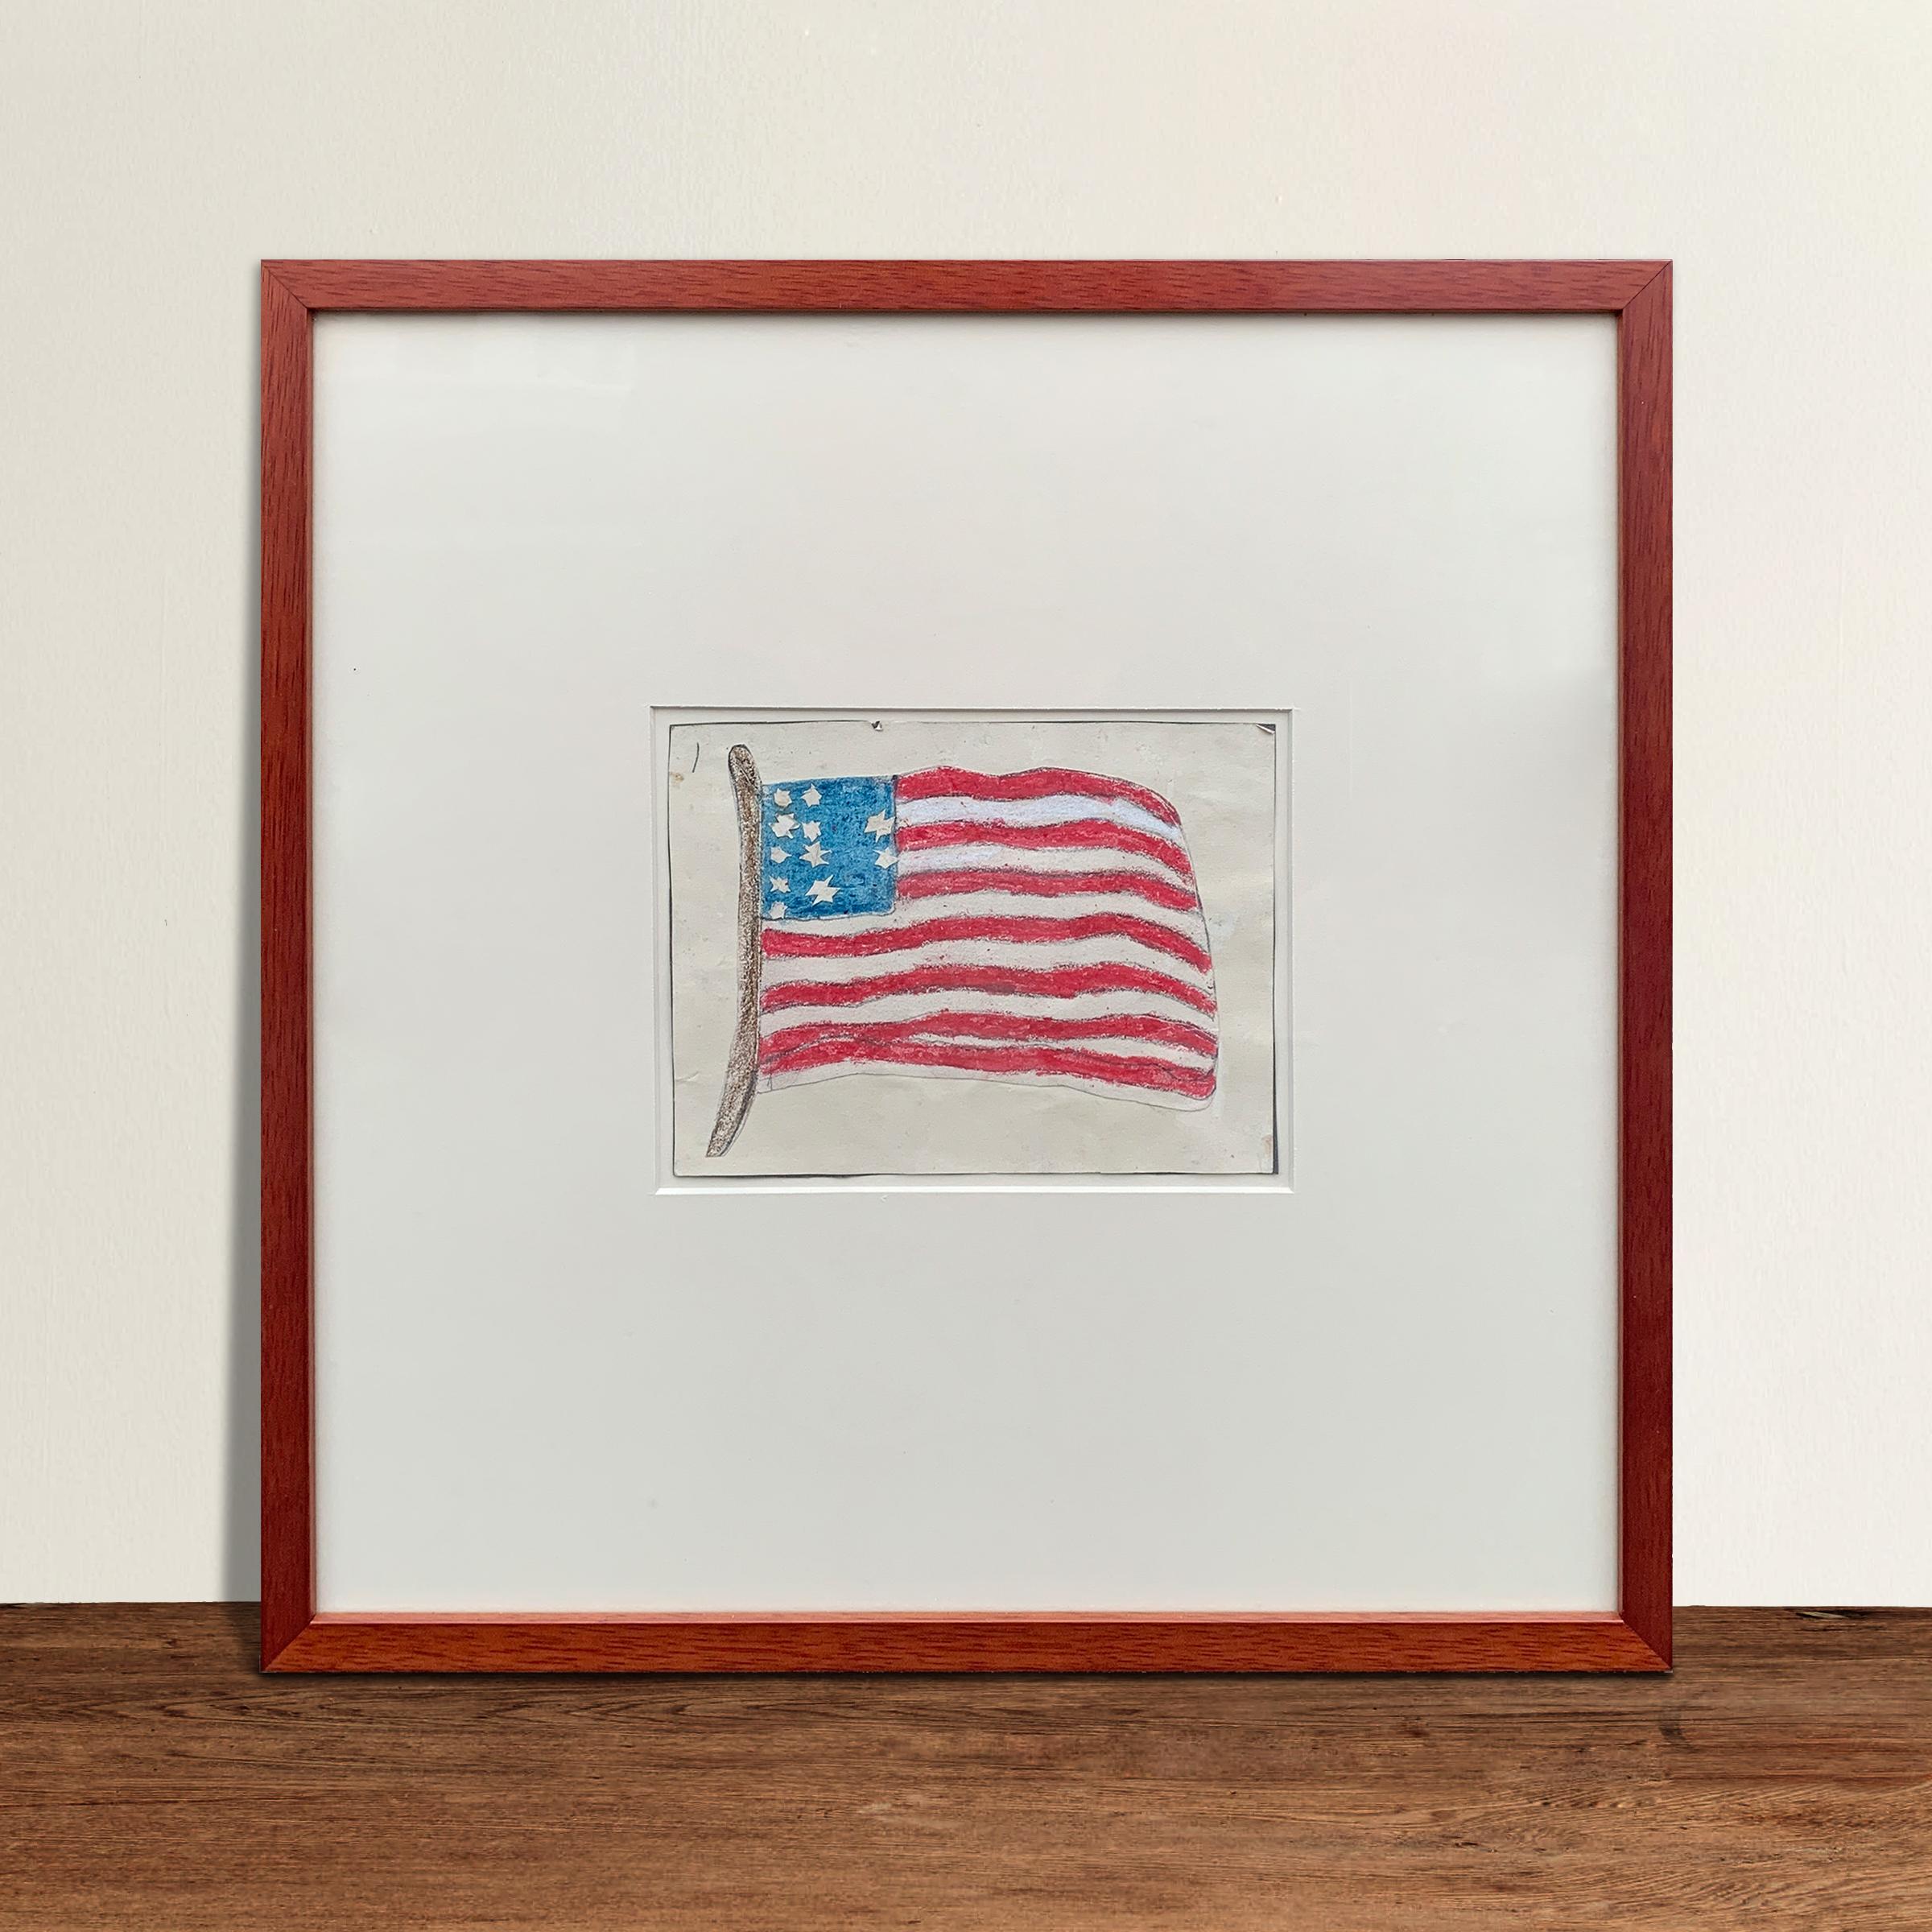 A wonderfully whimsical and delightful 20th century American flag collage composed with a red, white, and blue flag colored with crayon on paper, cut out and applied to more paper. The stars are cut out of paper and applied to the flag. Floated,